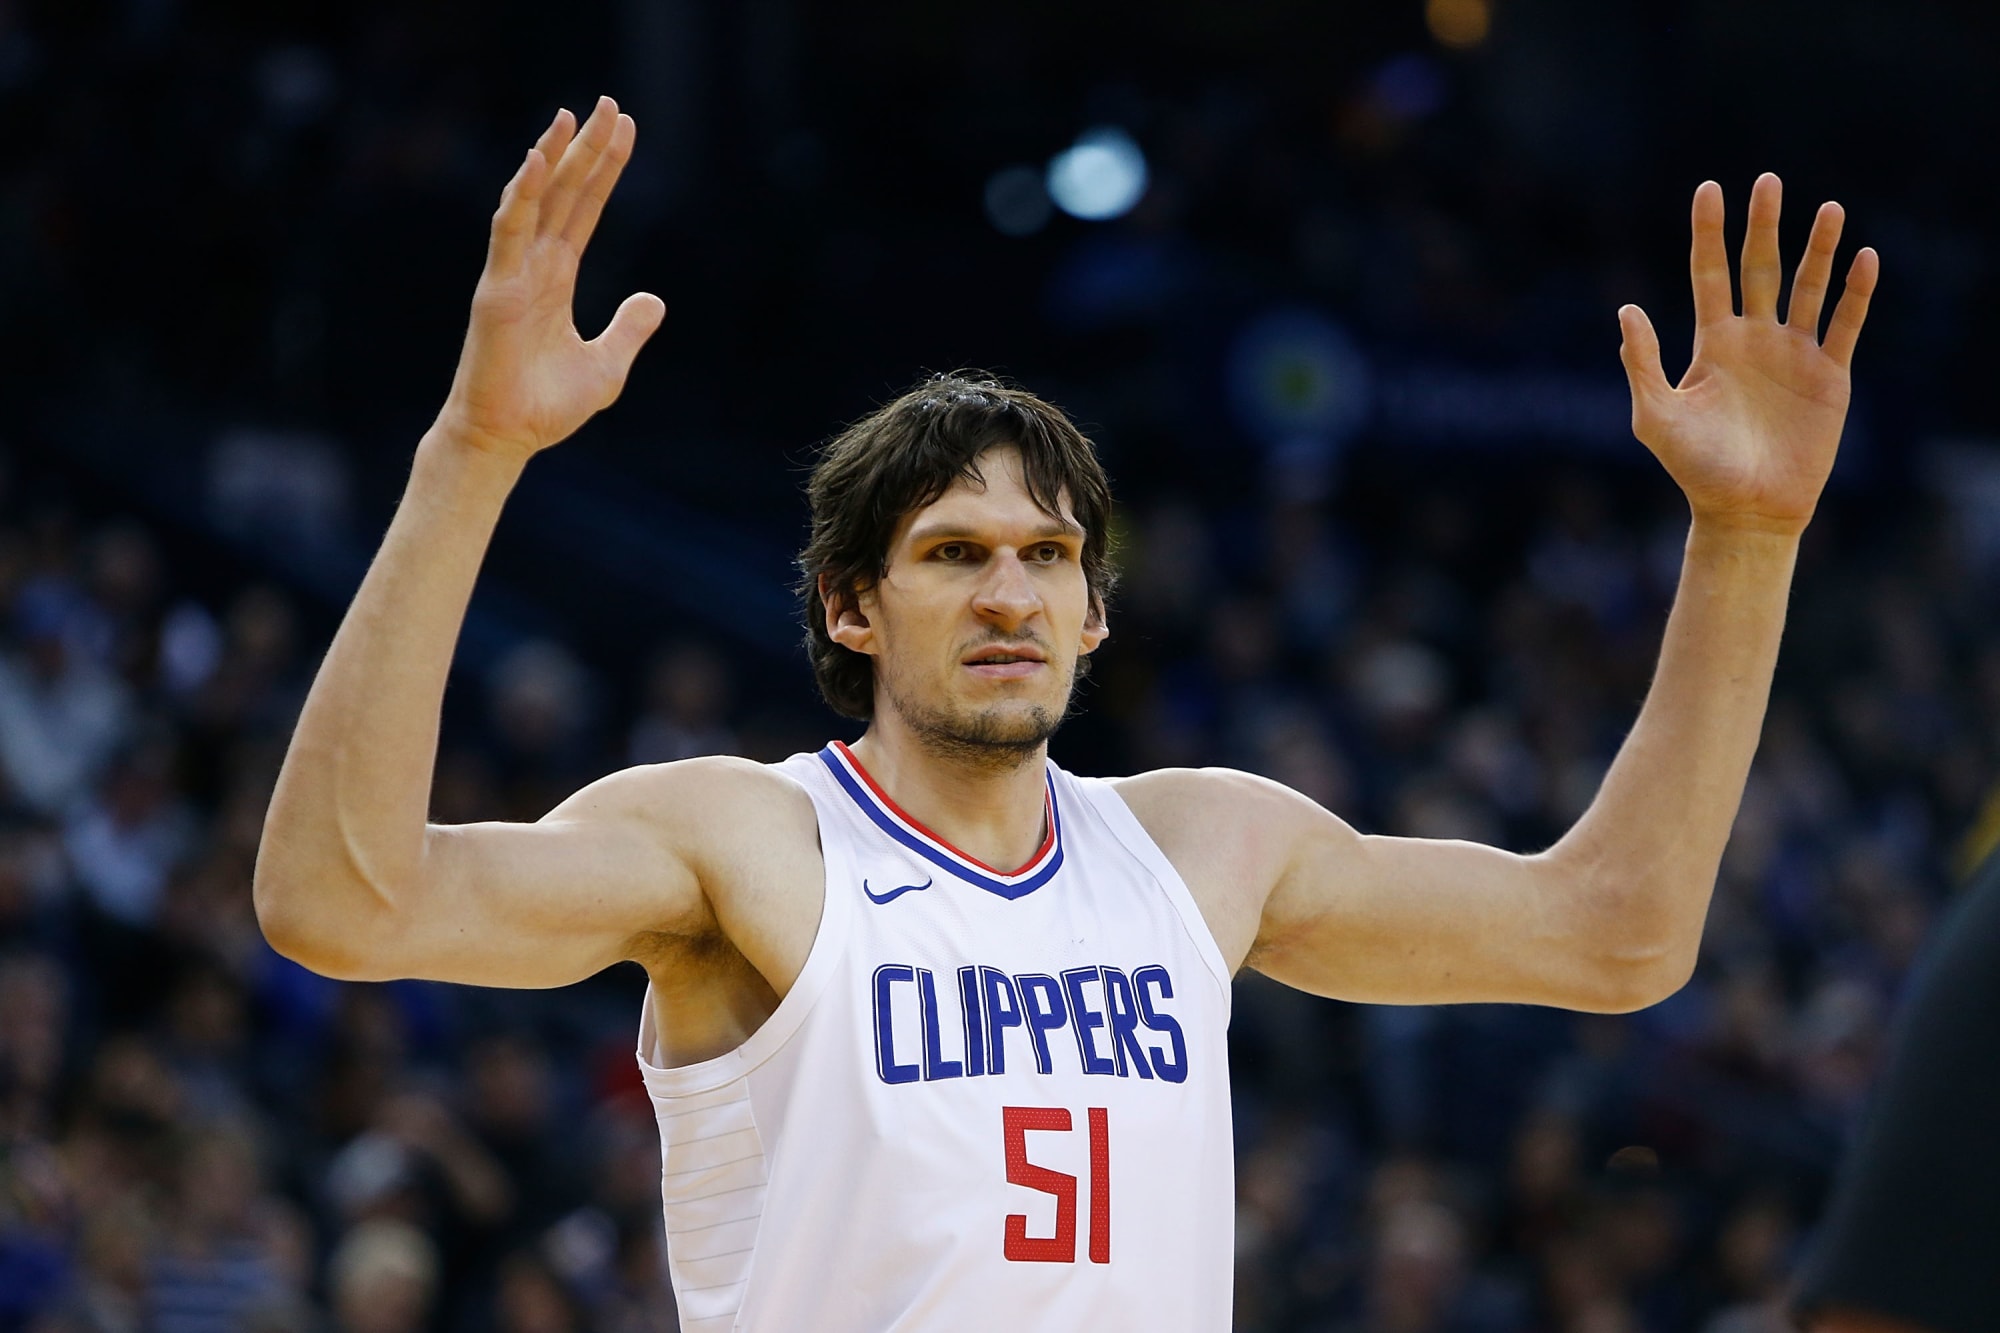 Clippers Live: Boban Marjanovic was a key player with 18 pts in 15 minutes!